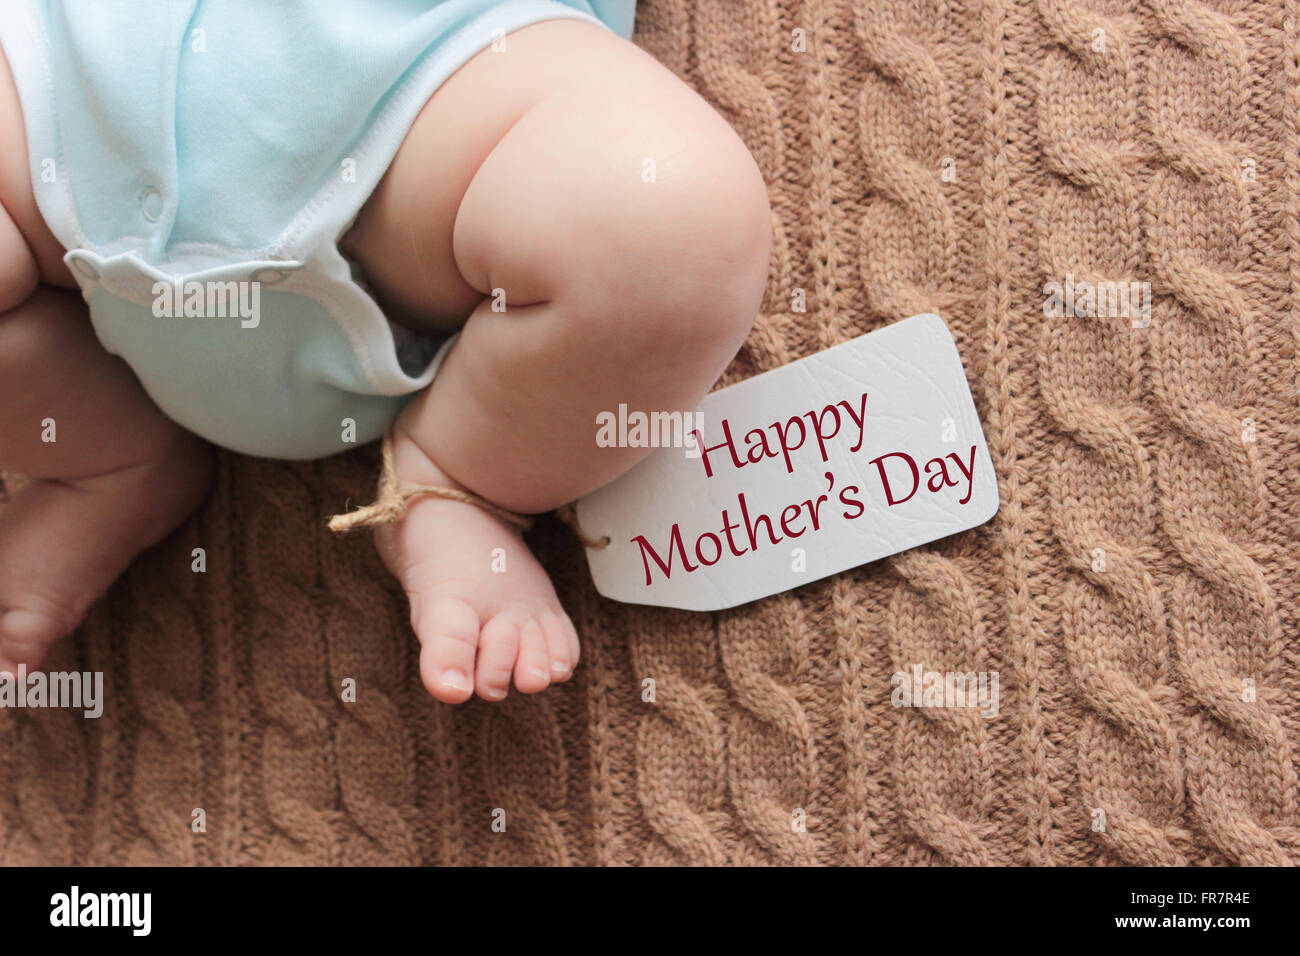 Newborn baby feet on knitted background, mother's day concept Stock Photo